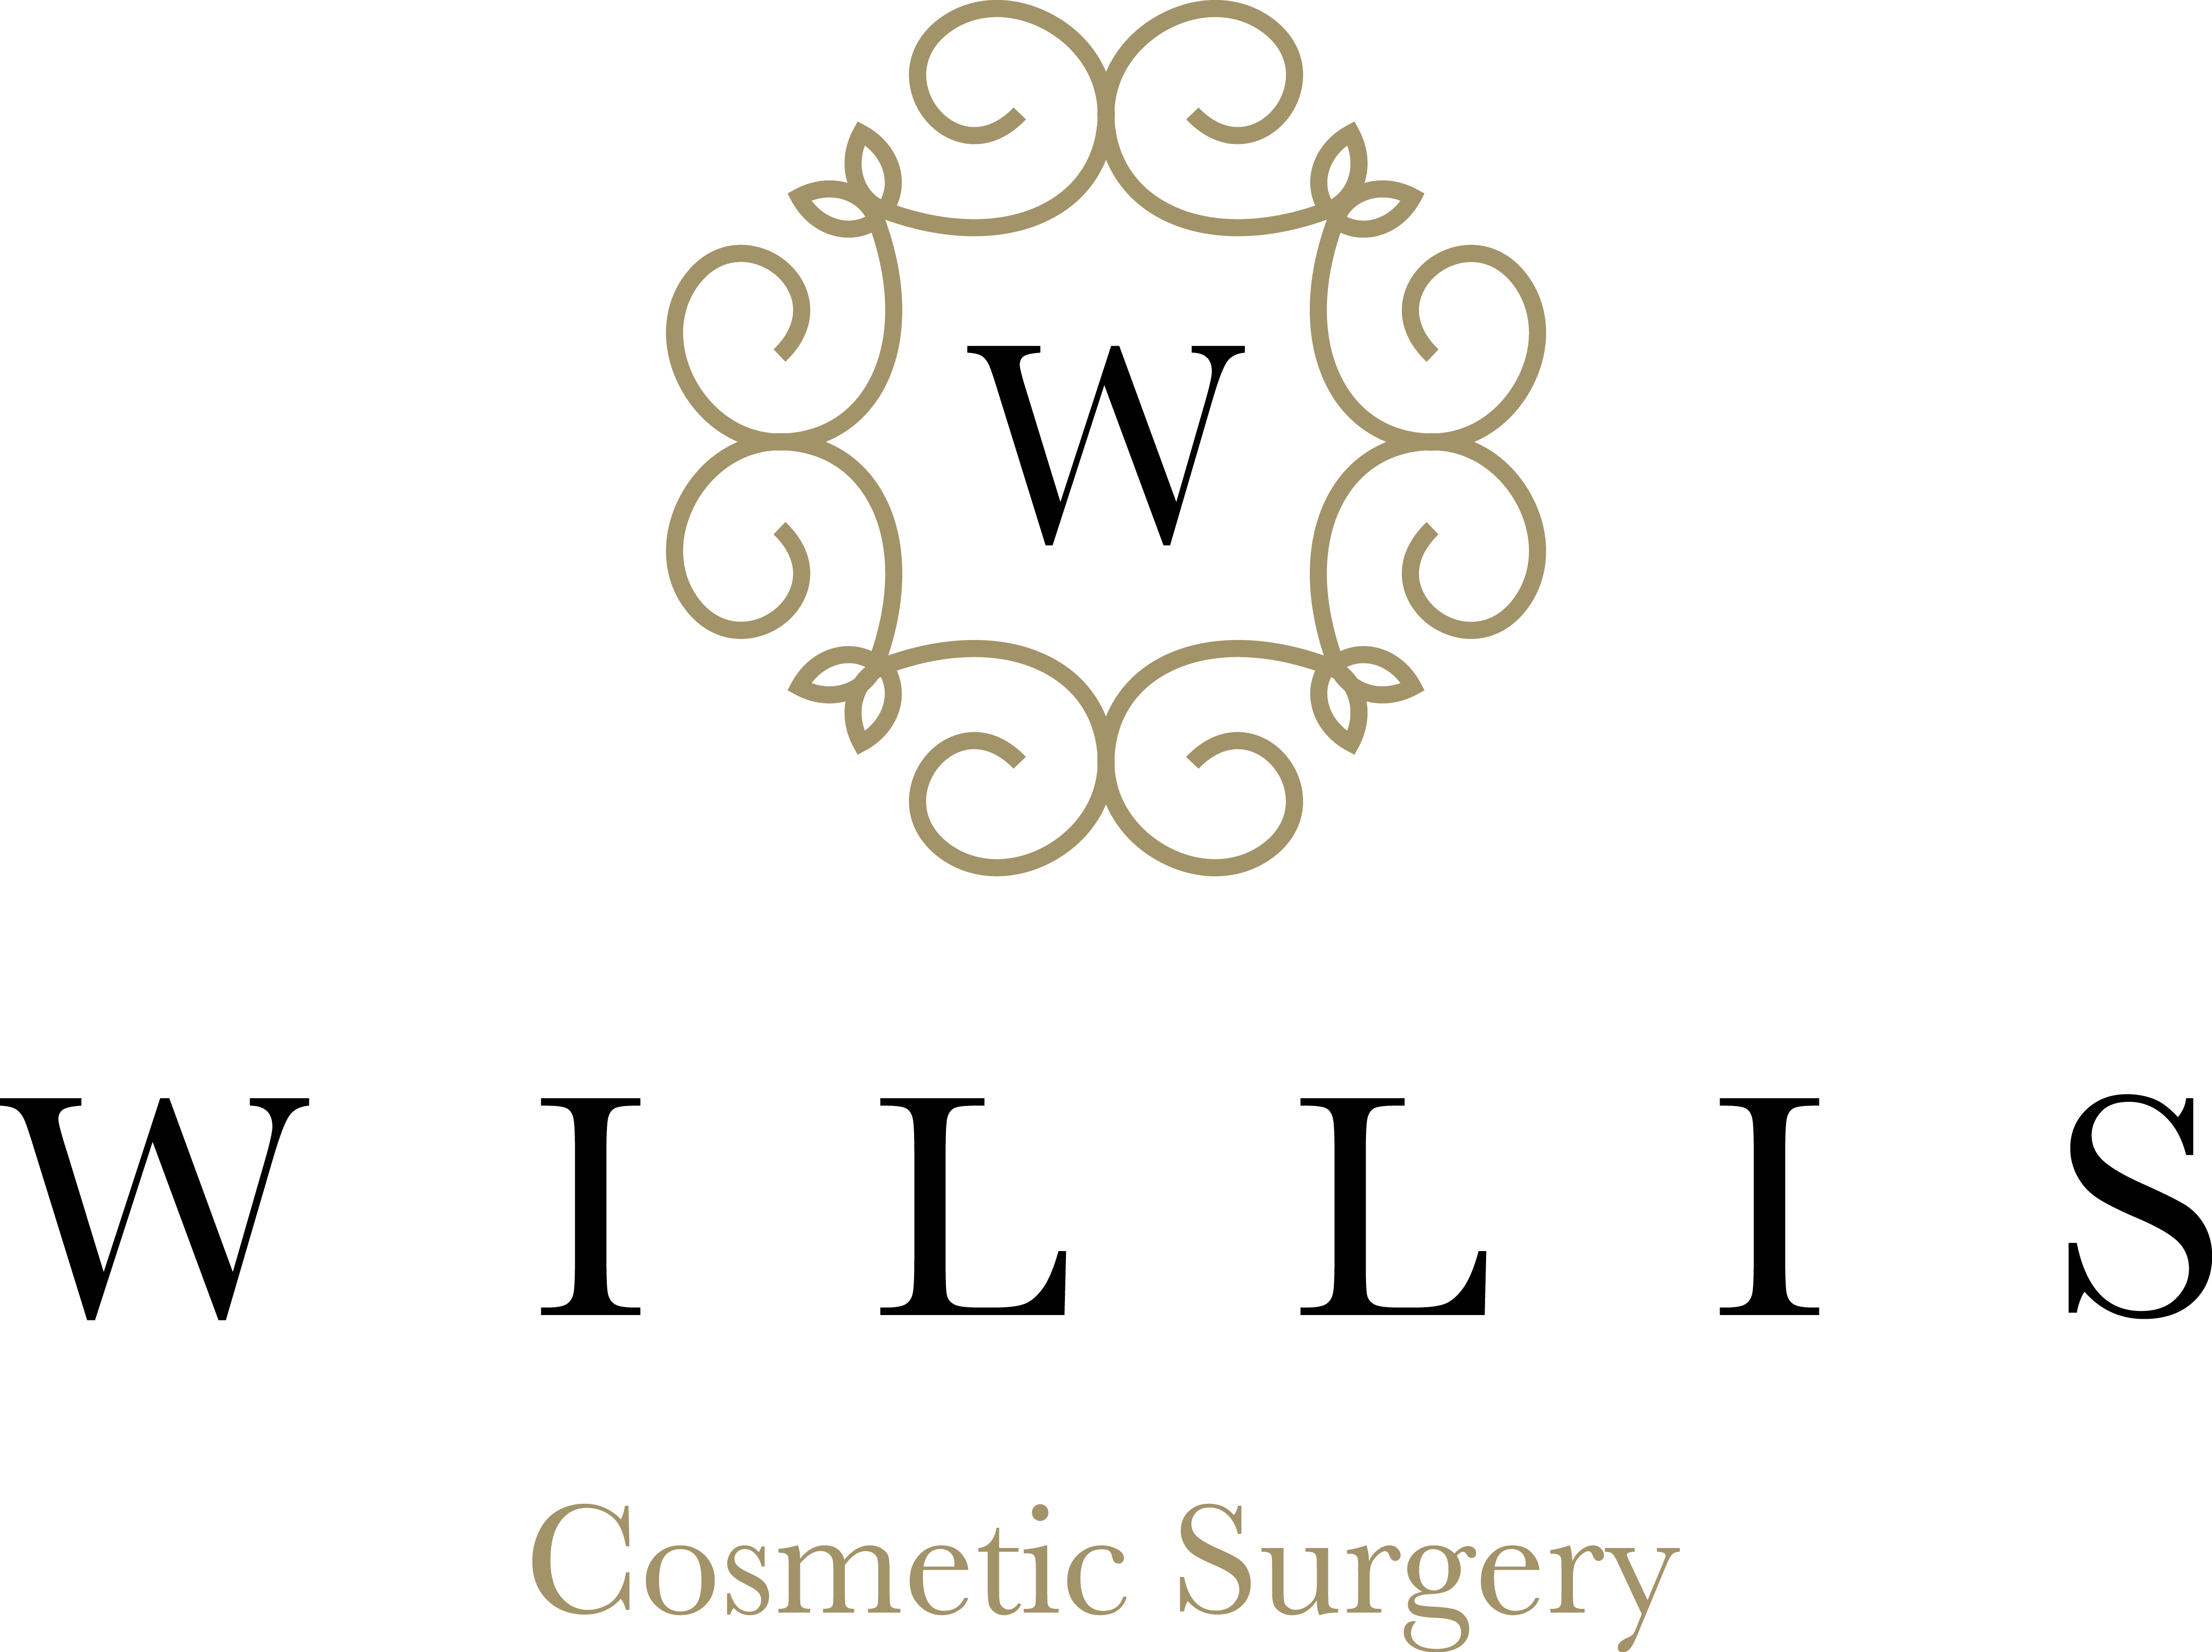 Willis Cosmetic Surgery - logo full color png